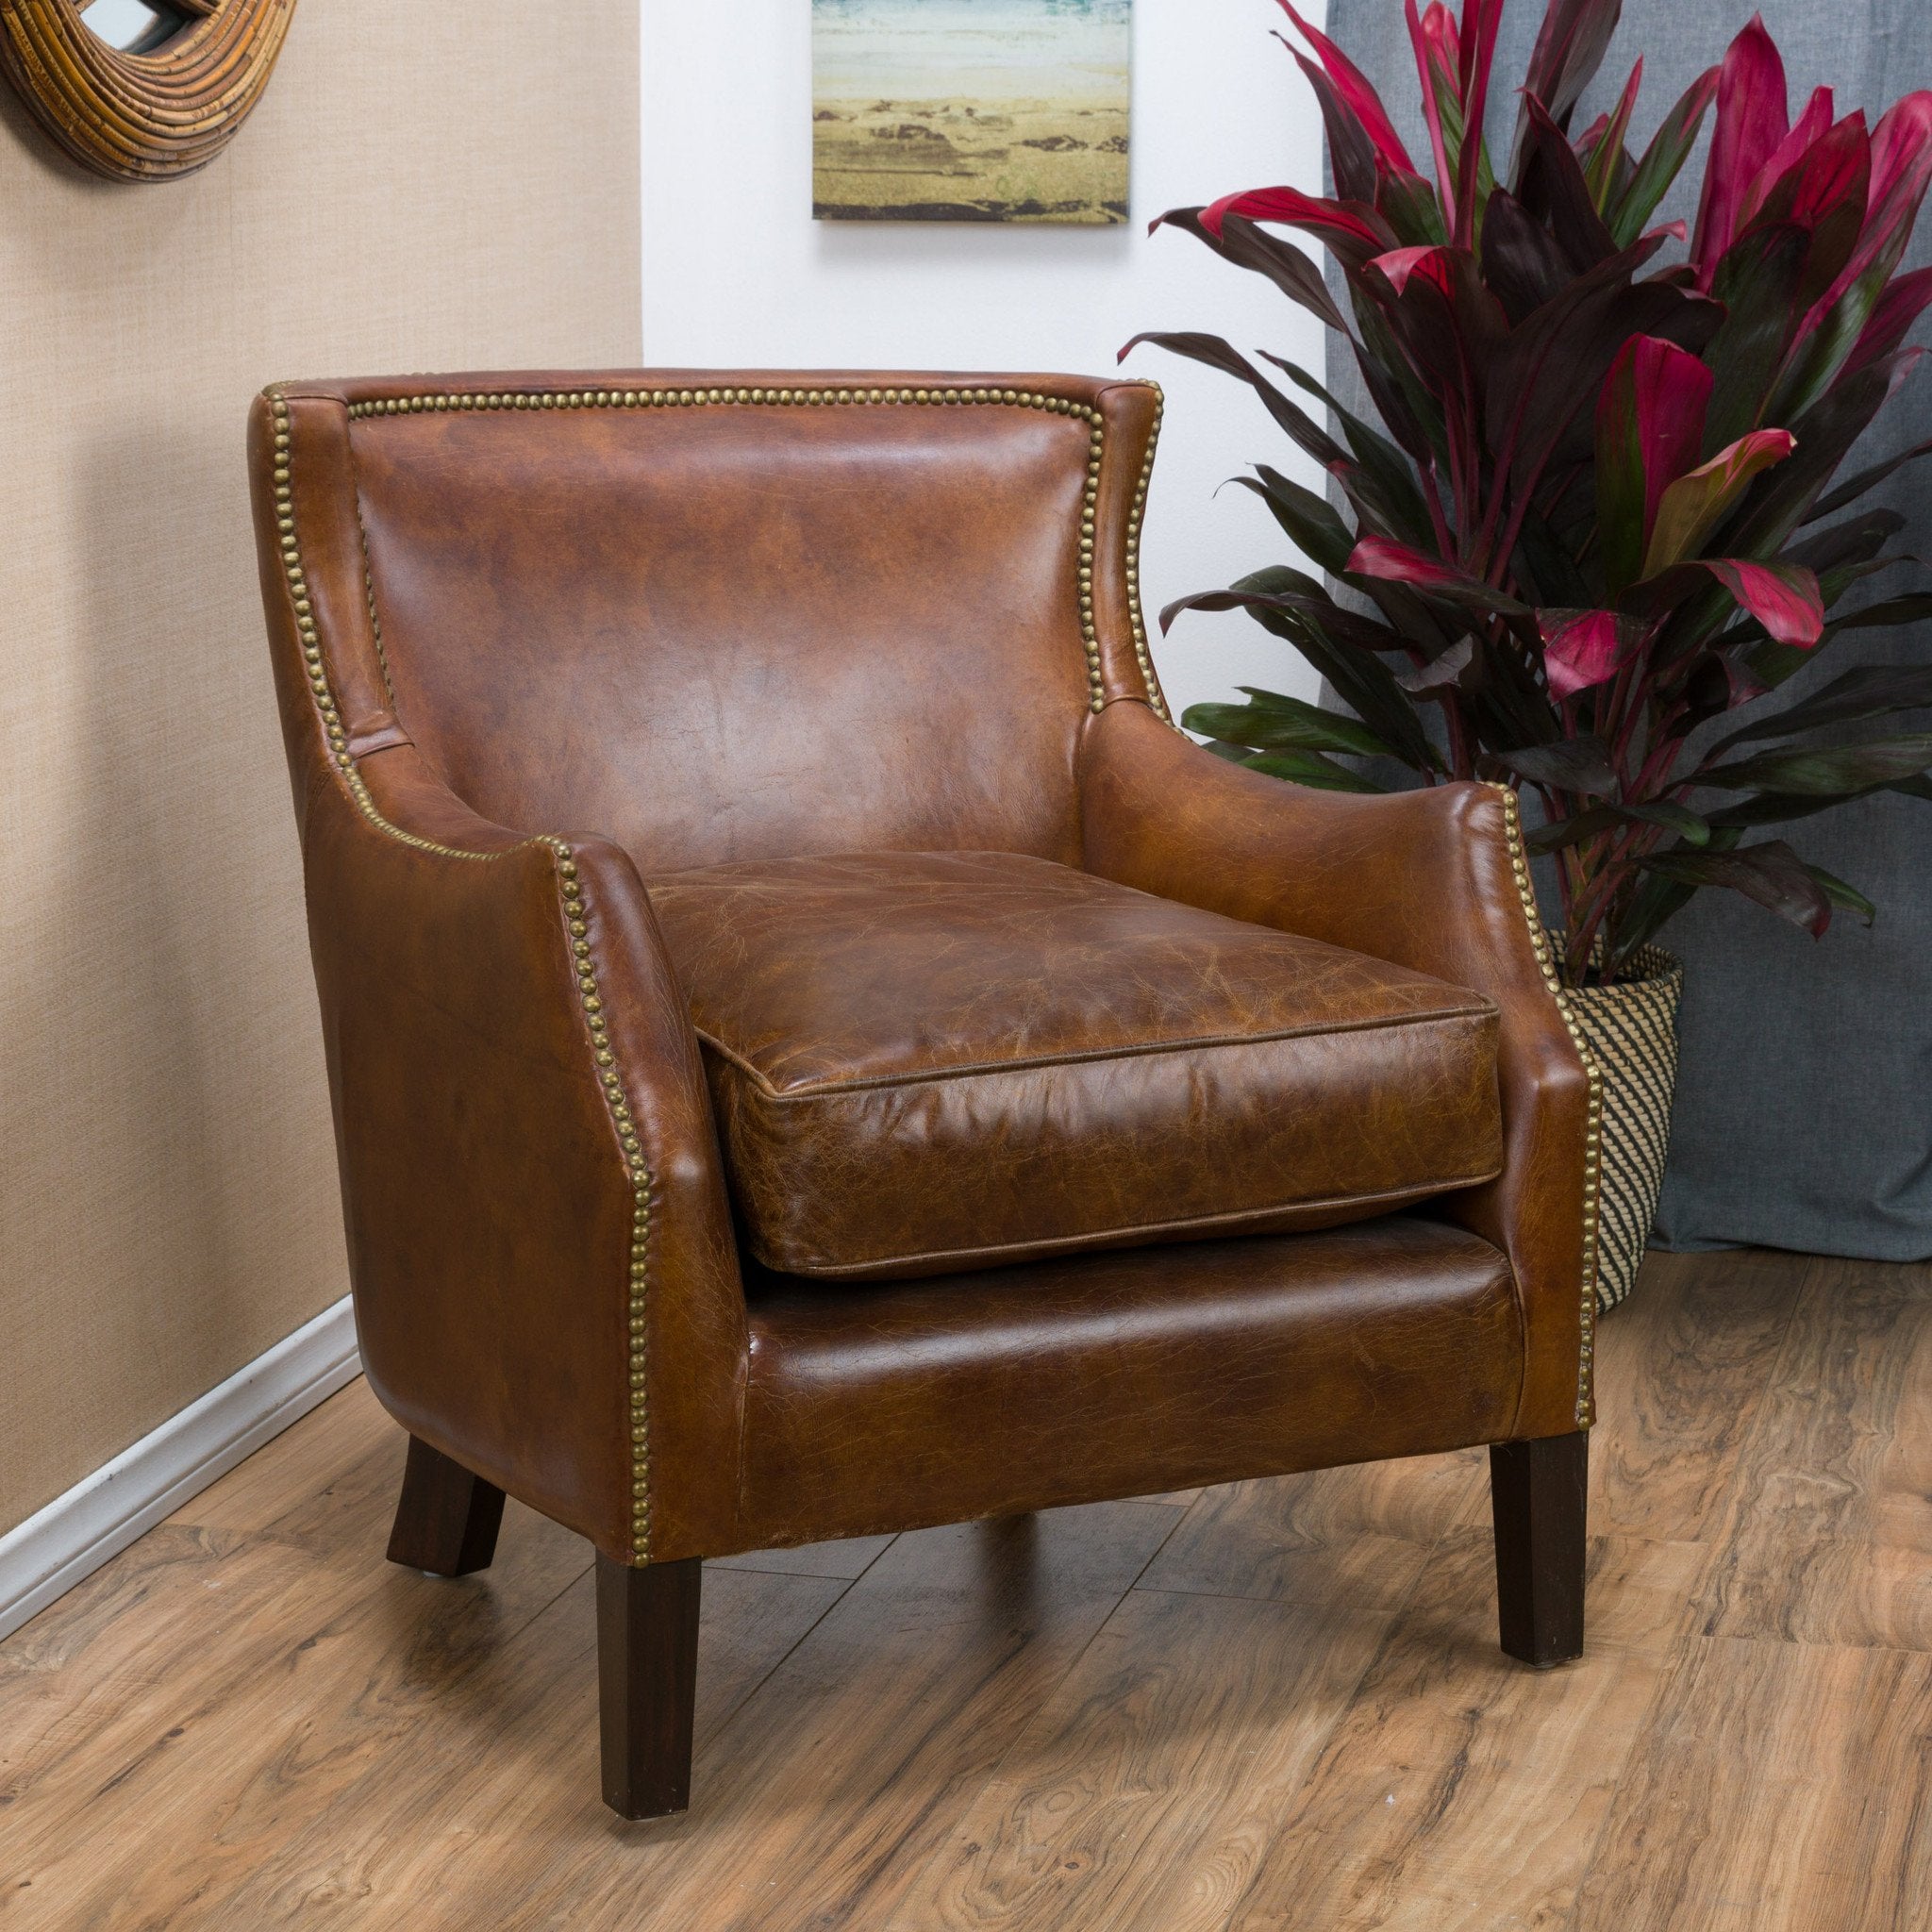 Brown Top Grain Leather Upholstered Club Chair with Nailhead Trim - NH